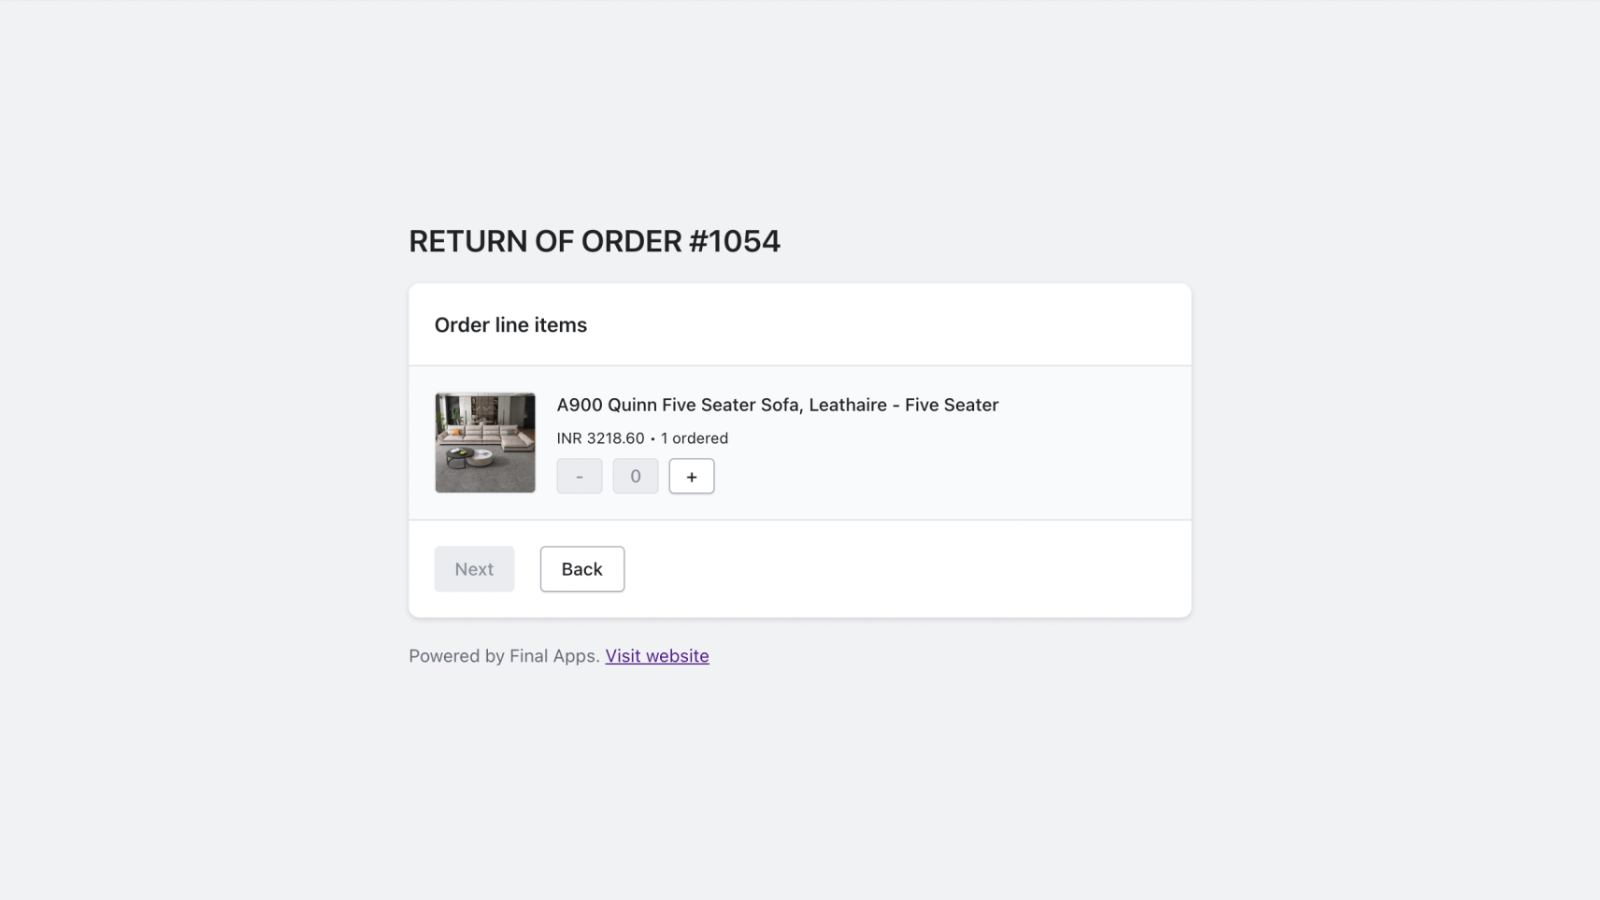 select order to return